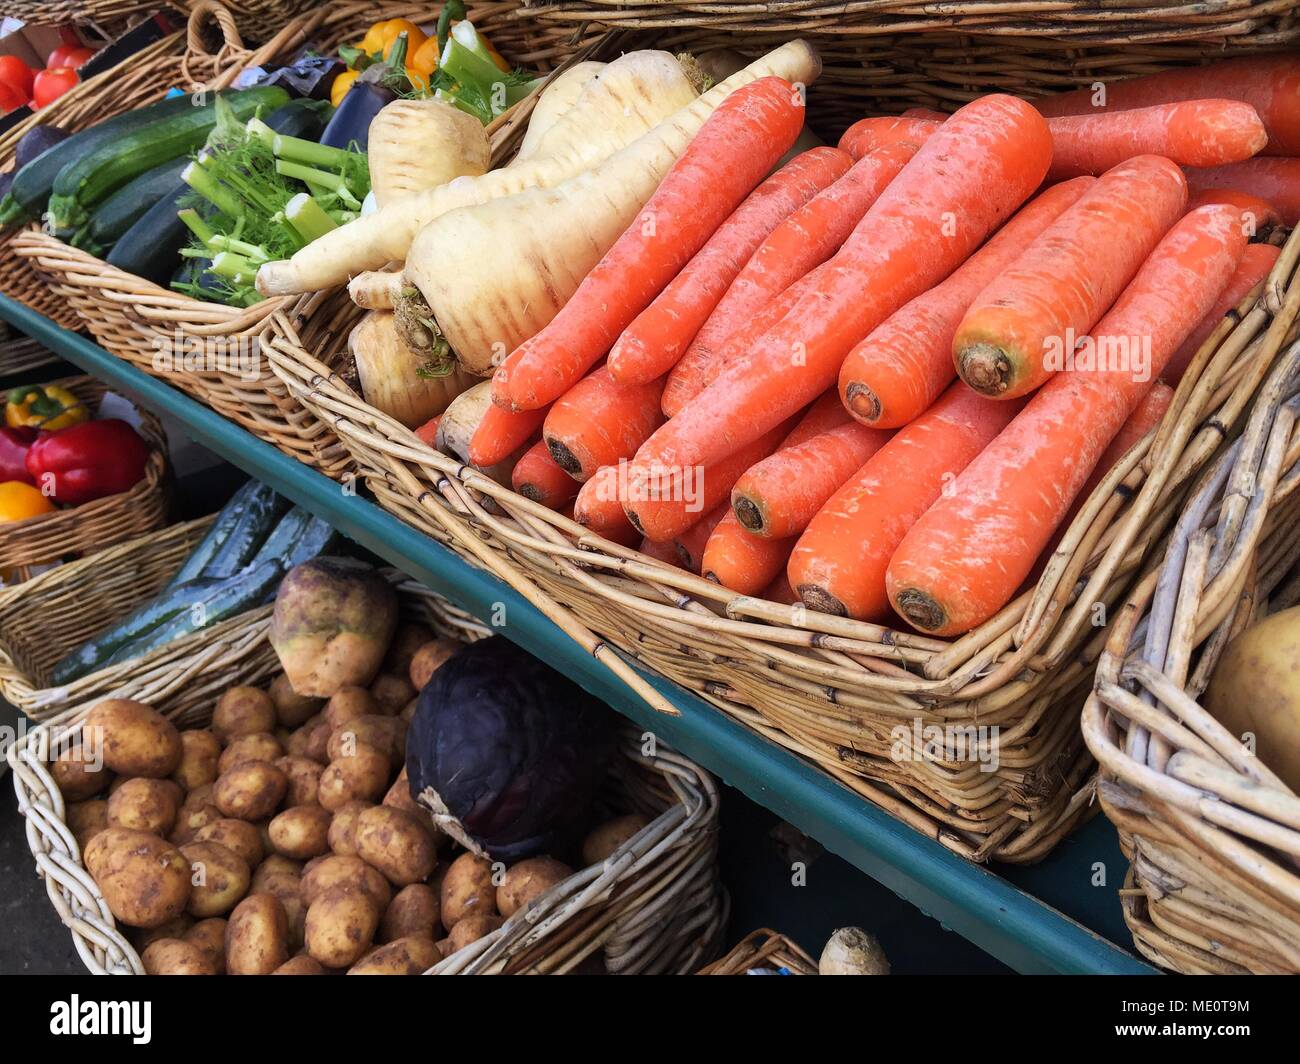 An outdoor market stall laden with a variety of fresh, organic fruit and vegetables including tomatoes, mushrooms and peppers. Stock Photo